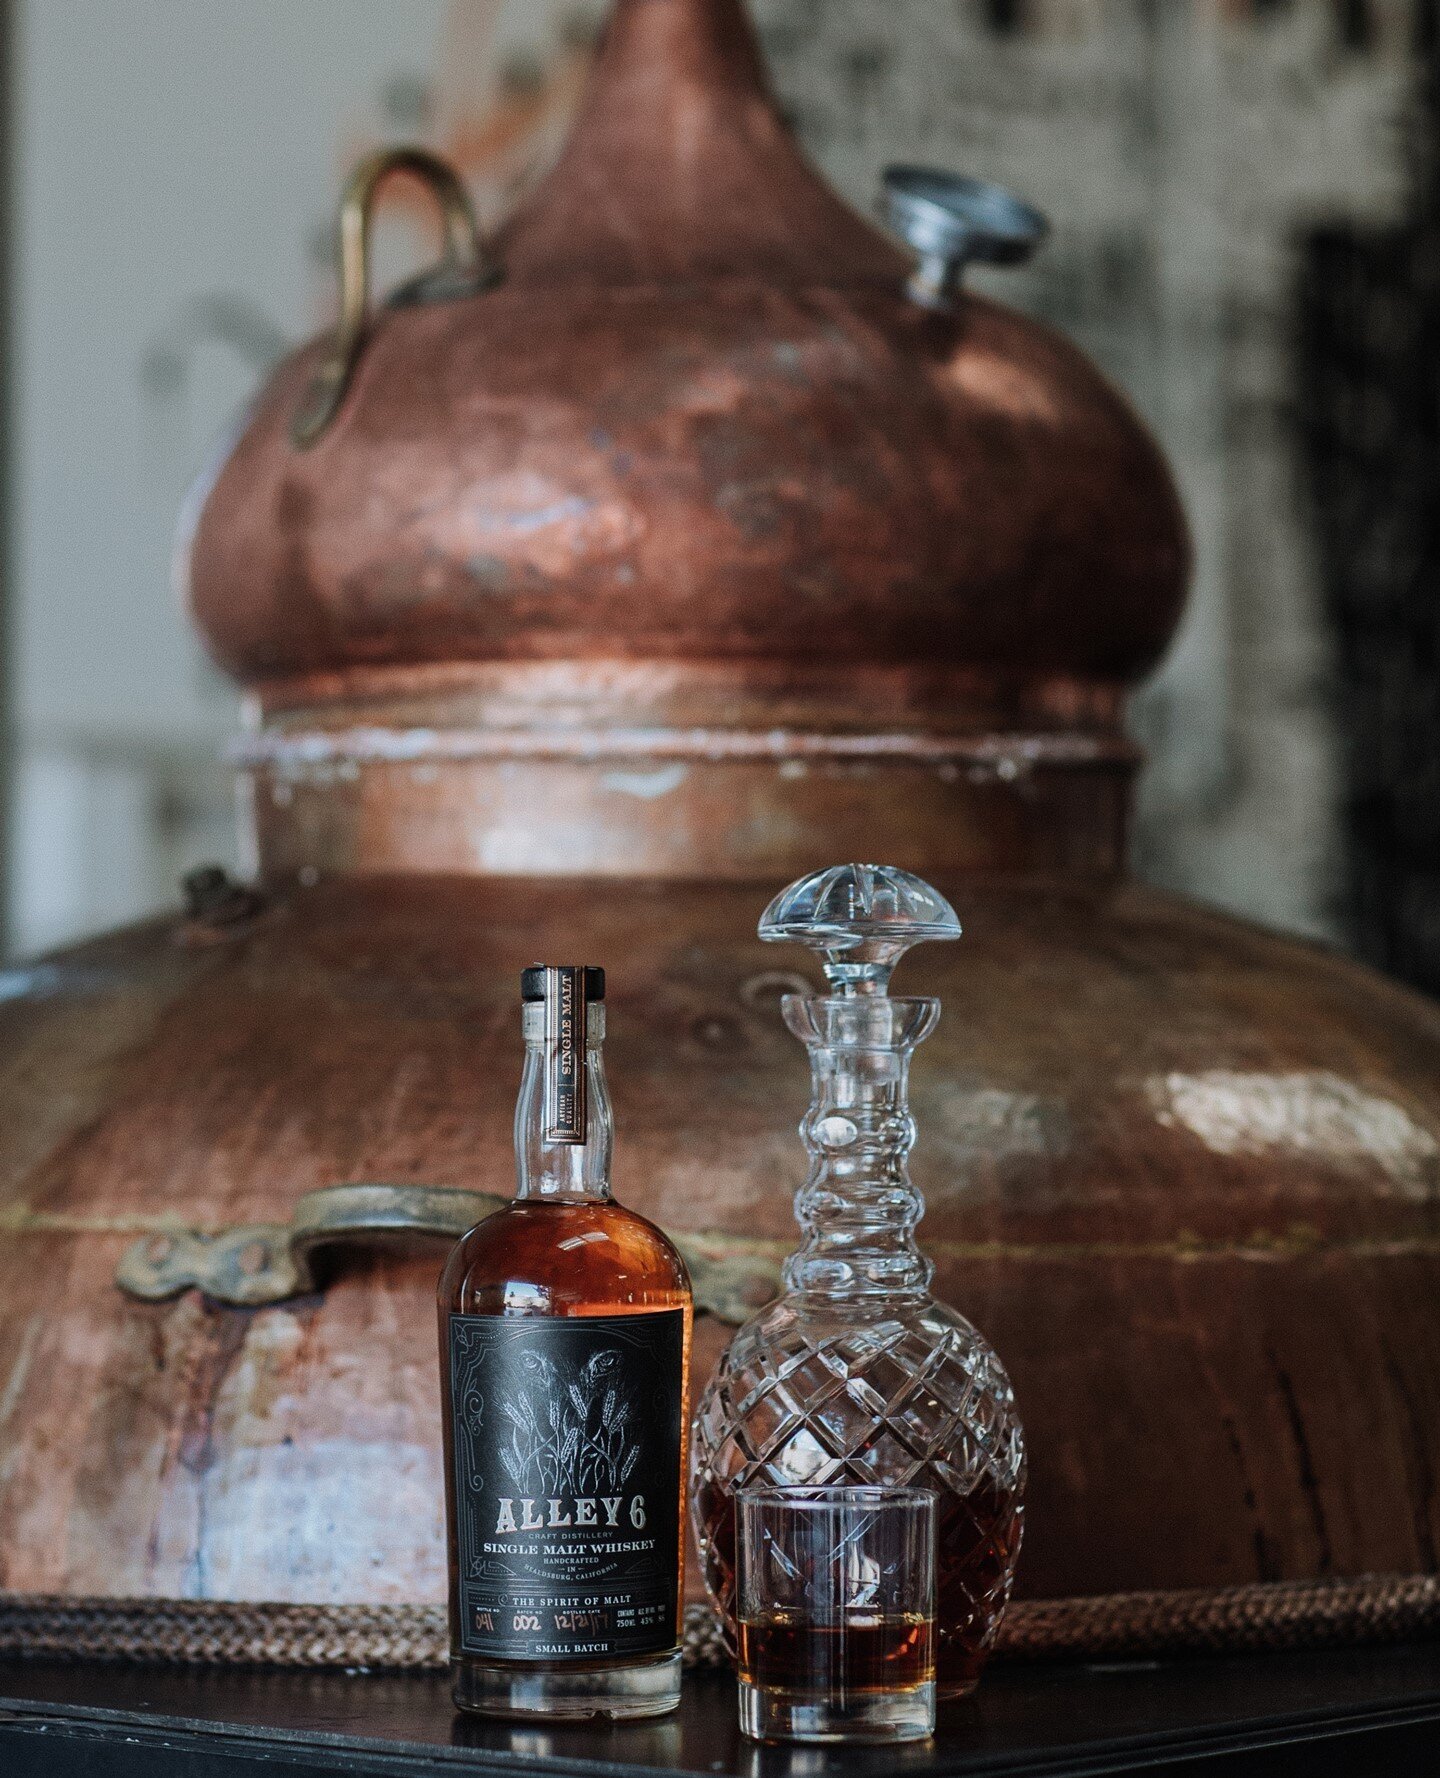 COPPER POT STILLS ⁠
⁠
Copper reacts on a molecular level with the sulfurs released during fermentation helping the purification process ⁠
⁠
This will create an amazing flavor and smoothness to our spirits 🥃⁠
⁠
⁠
#alley6 #alley6craftdistillery #craft